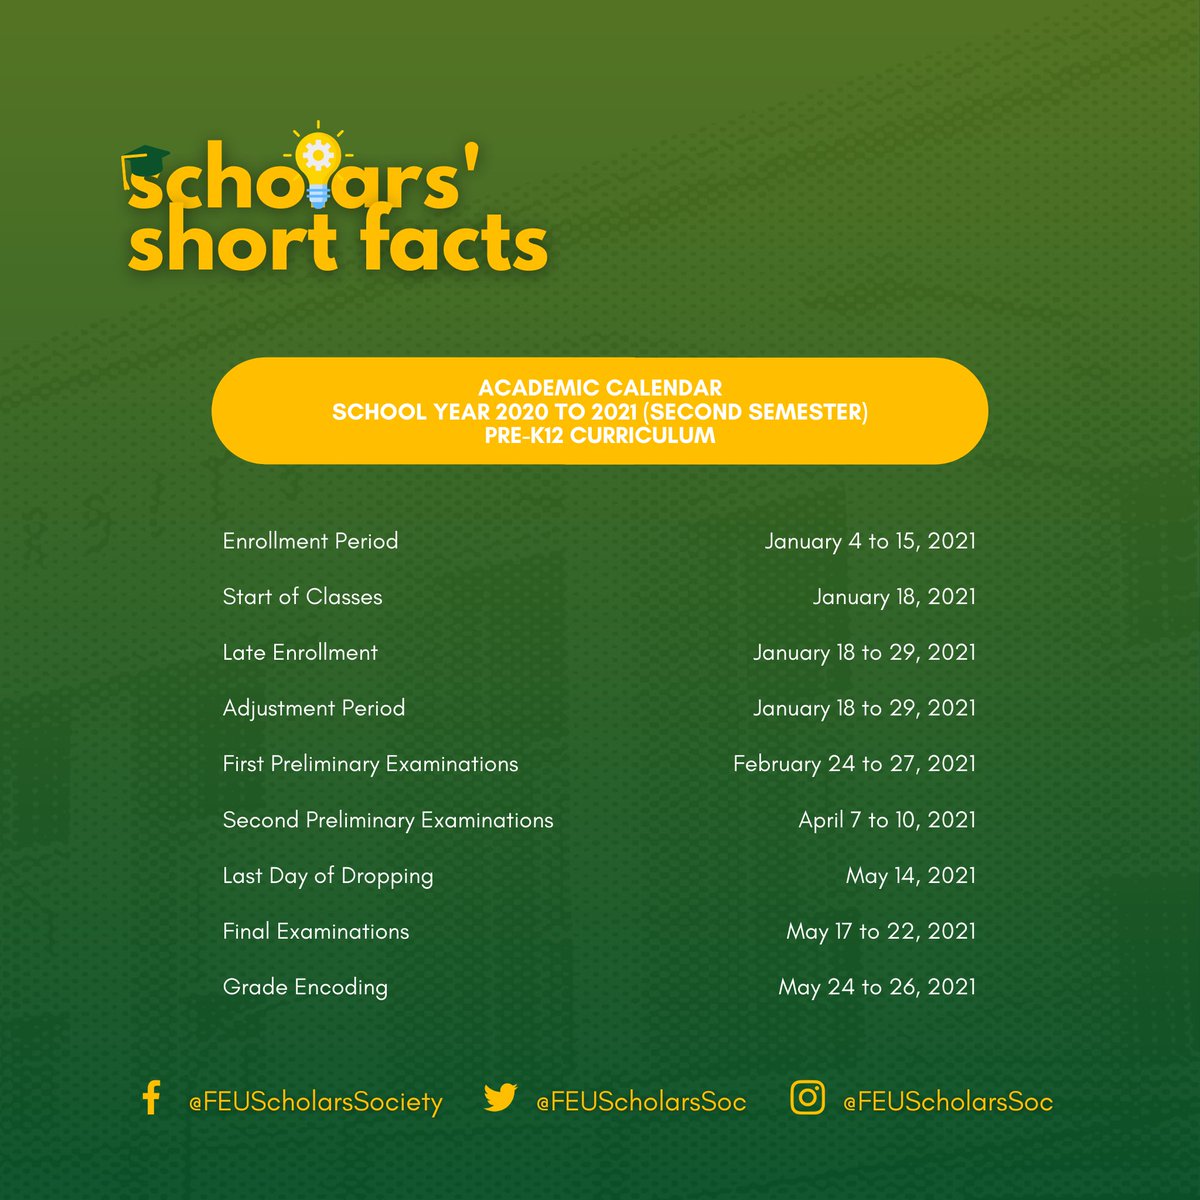 Tamaraw Scholars! 

Here are the important dates and guidelines to remember for the Second Semester, A.Y. 2020-2021.

Continue to nurture the TamScholar in you as you finish this semester strong. Good luck, FEU Scholars!

#SecondSemester
#TamScholar